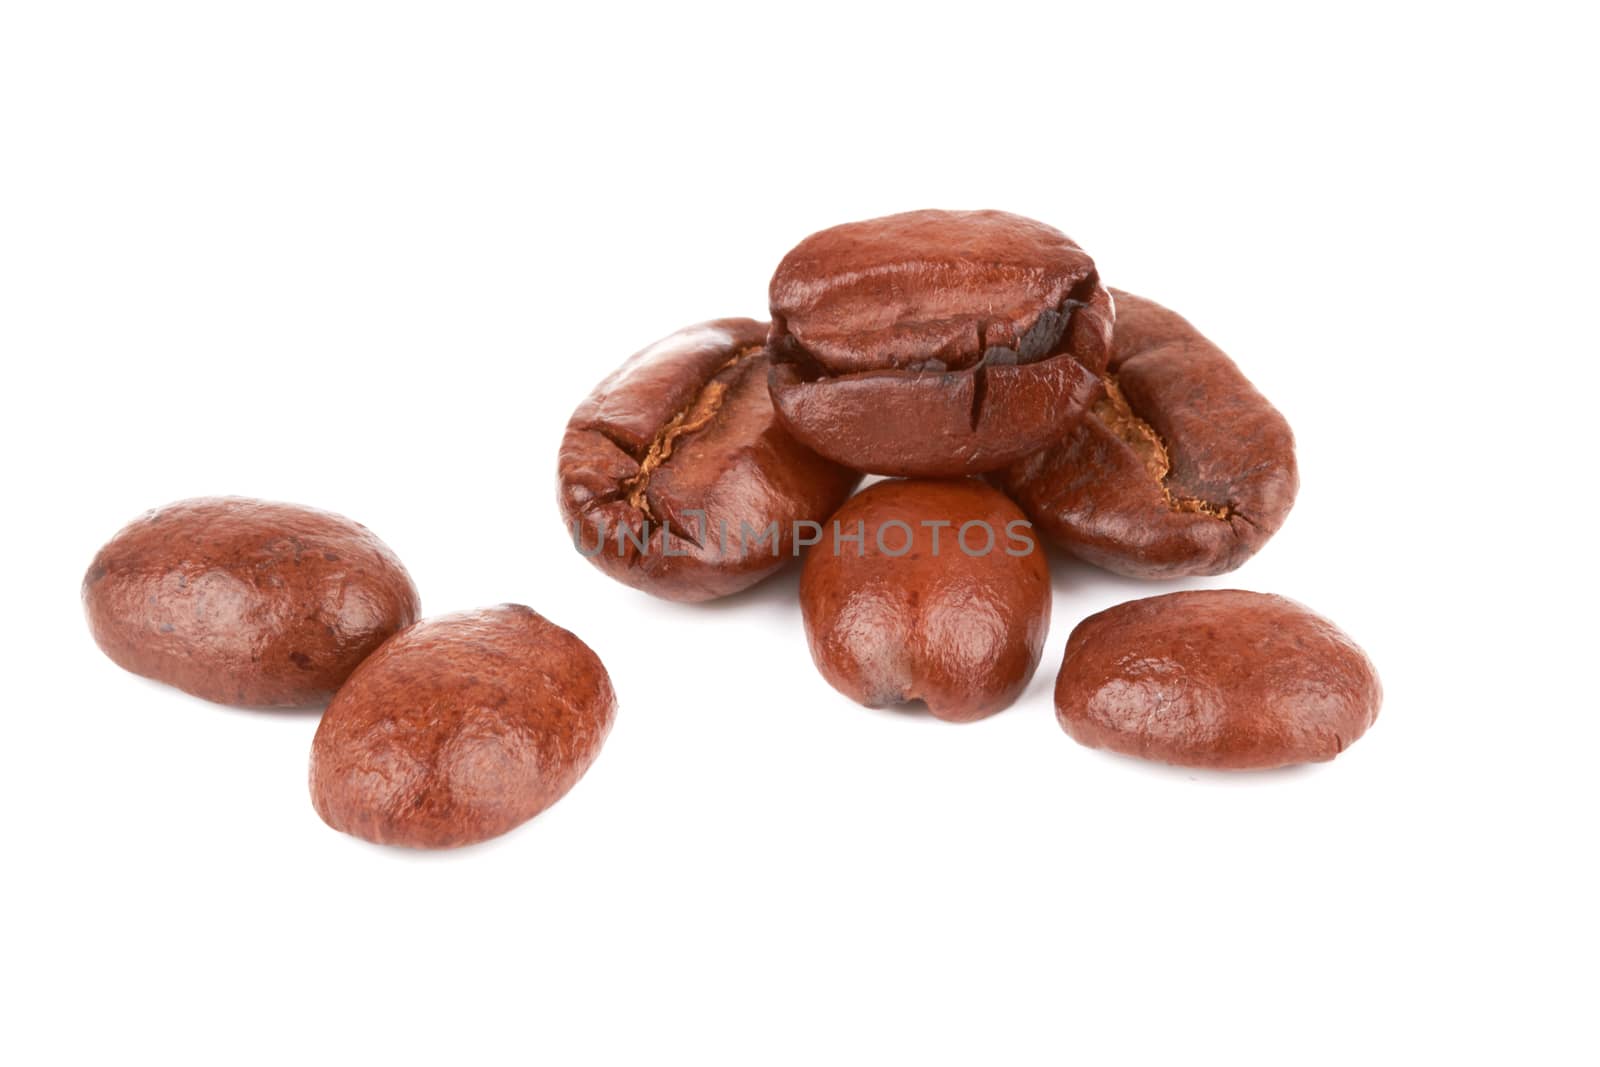 Brown coffee beans on a white background 